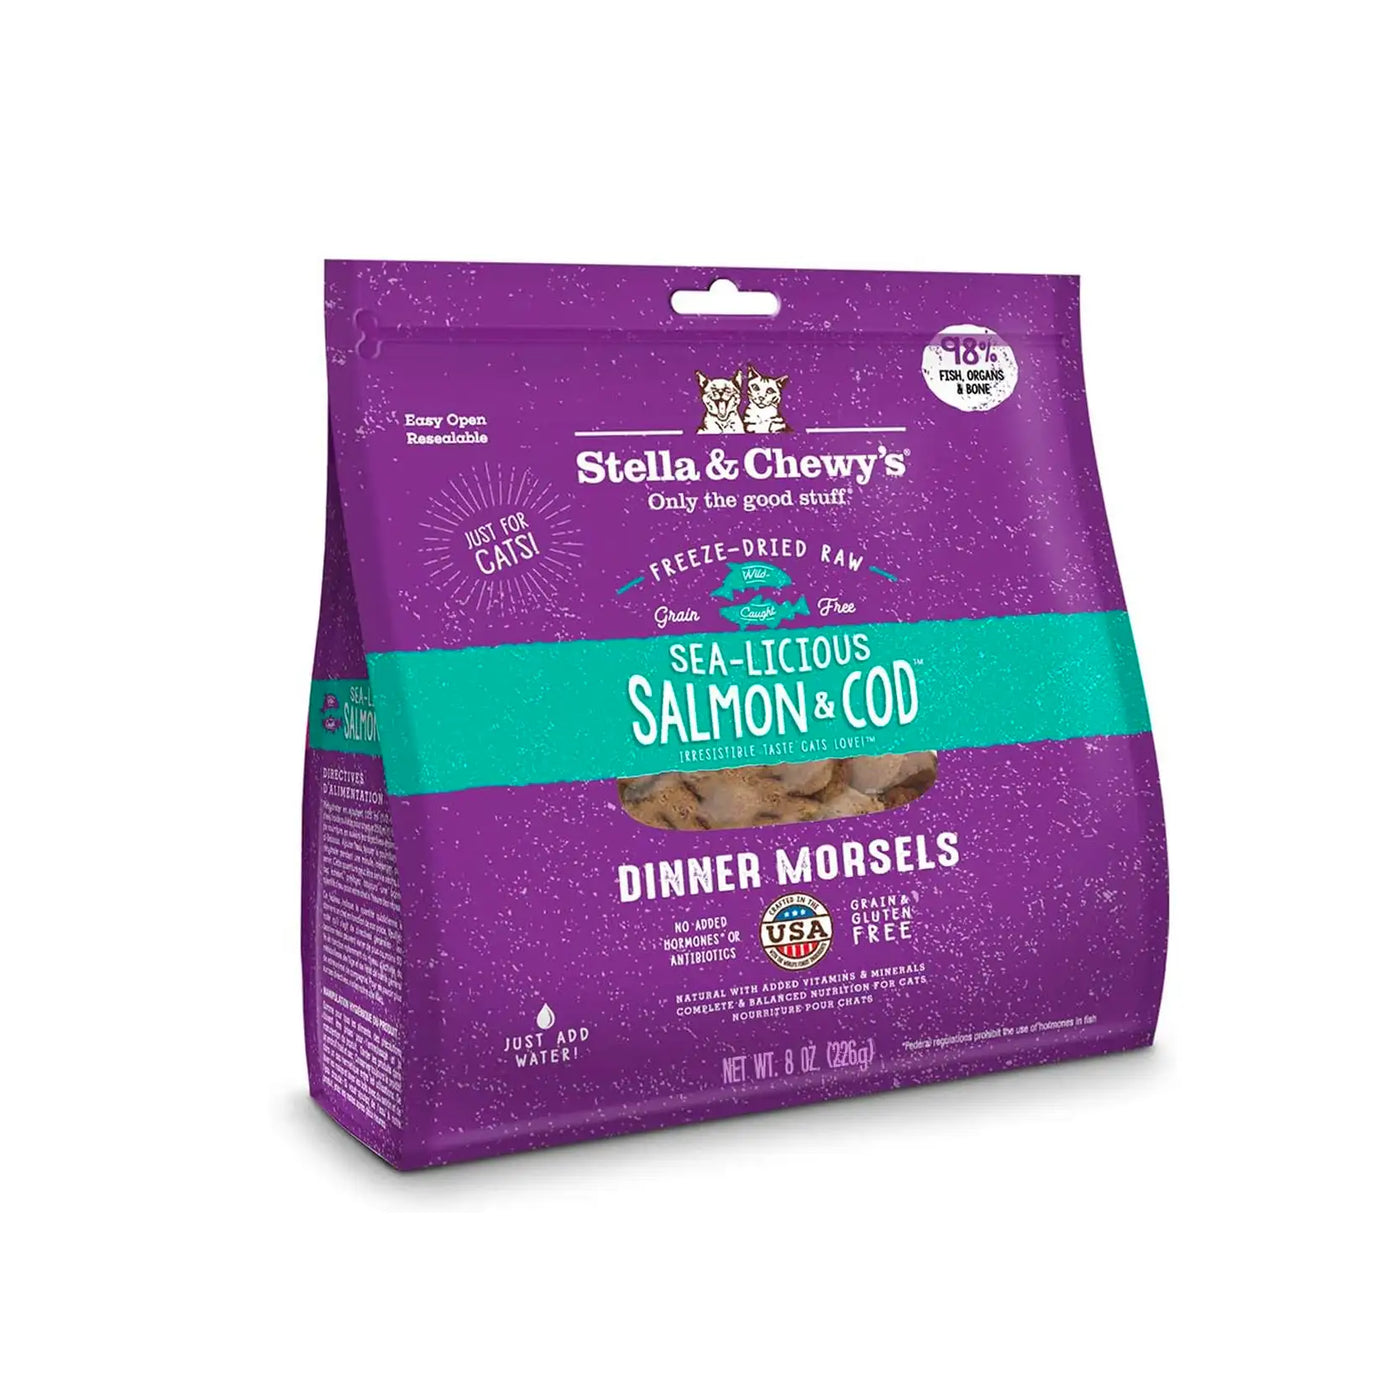 Stella & Chewy's - Freeze Dried Sea Licious Salmon & Cod Dinners Morsels (Cats)